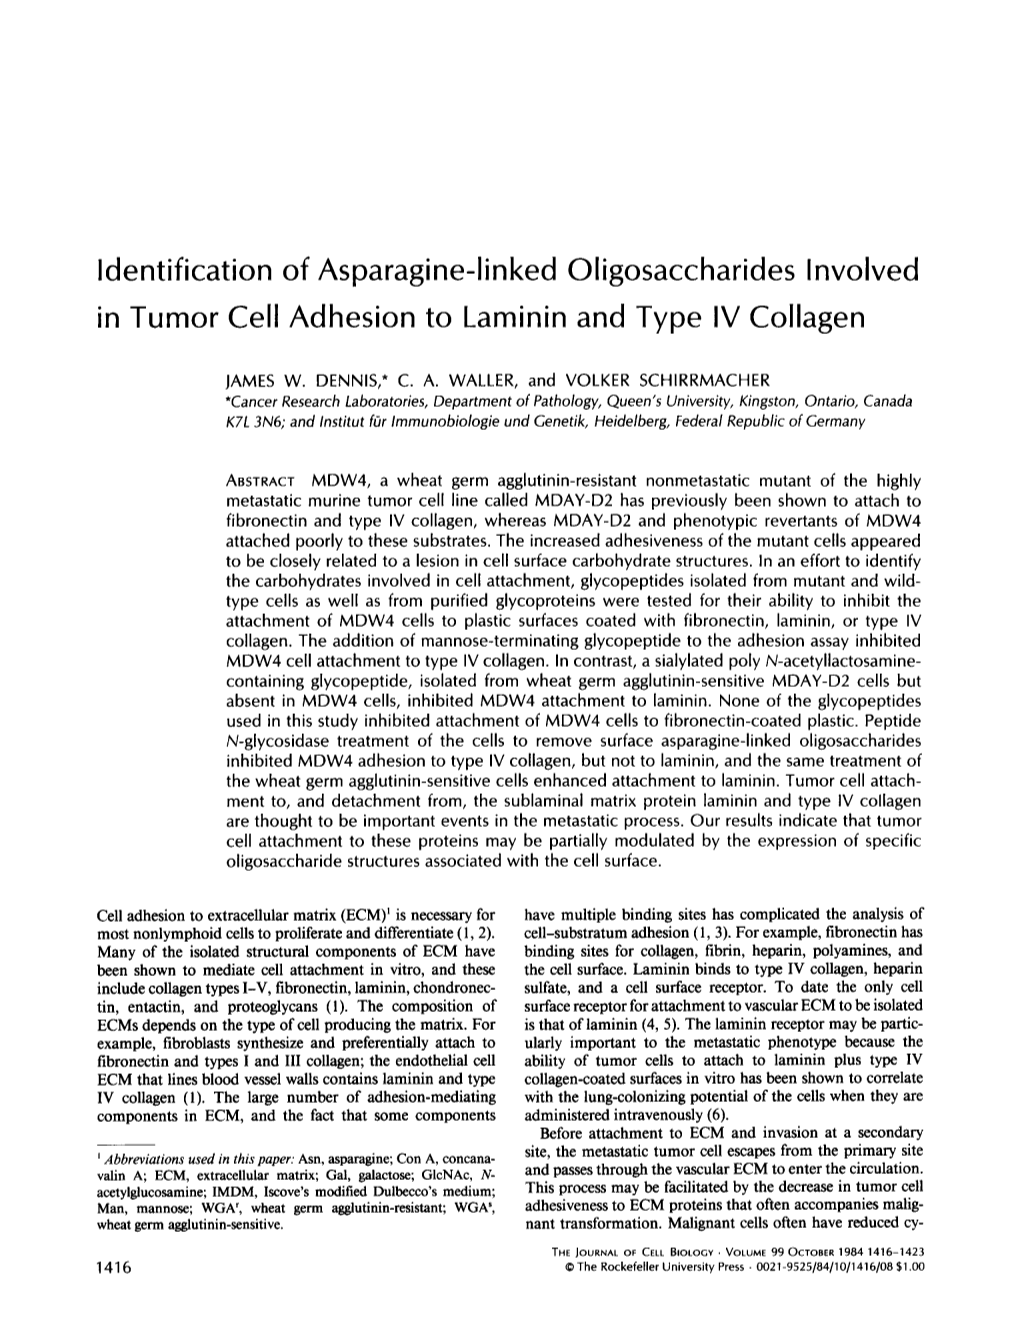 Identification of Asparagine-Linked Oligosaccharides Involved in Tumor Cell Adhesion to Laminin and Type IV Collagen